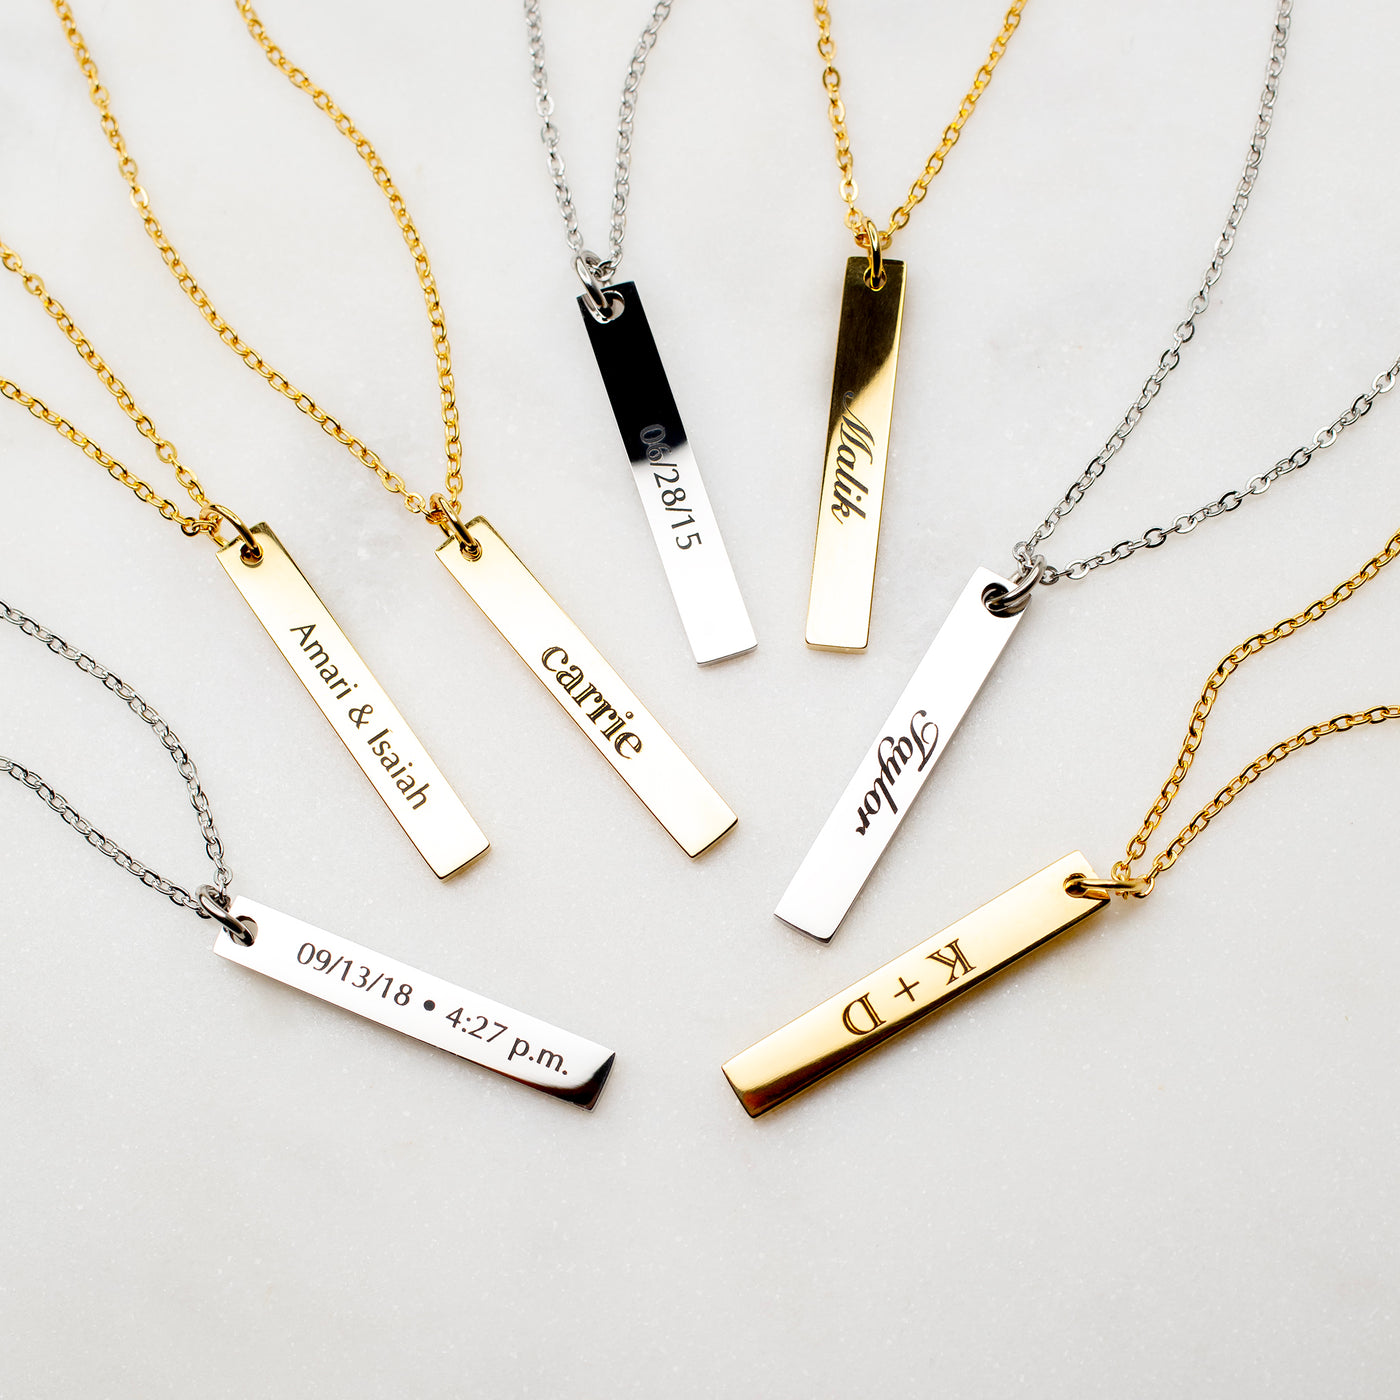 Extra Charm for Luca Engraved Vertical Name Bar Necklace - Personalized Add-On Pendant